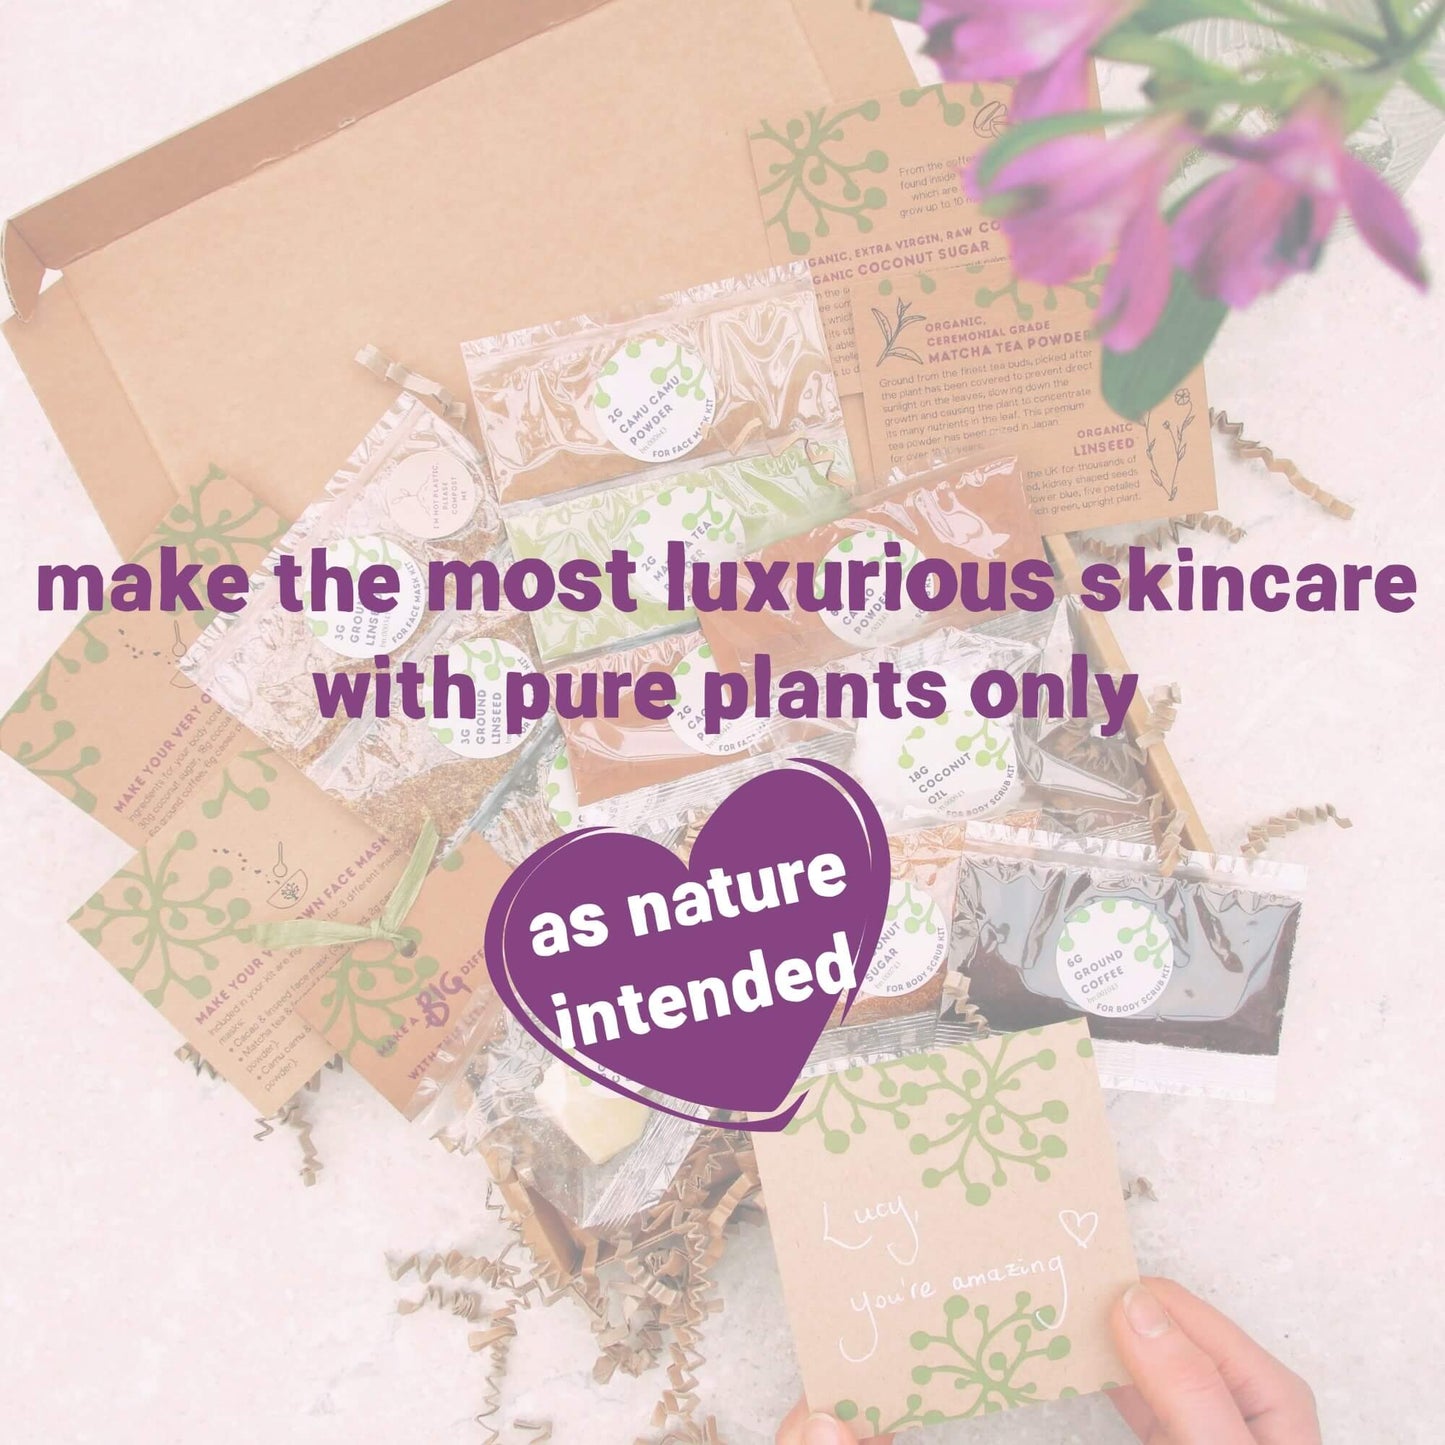 eco-friendly skincare inside 18th birthday letterbox gift